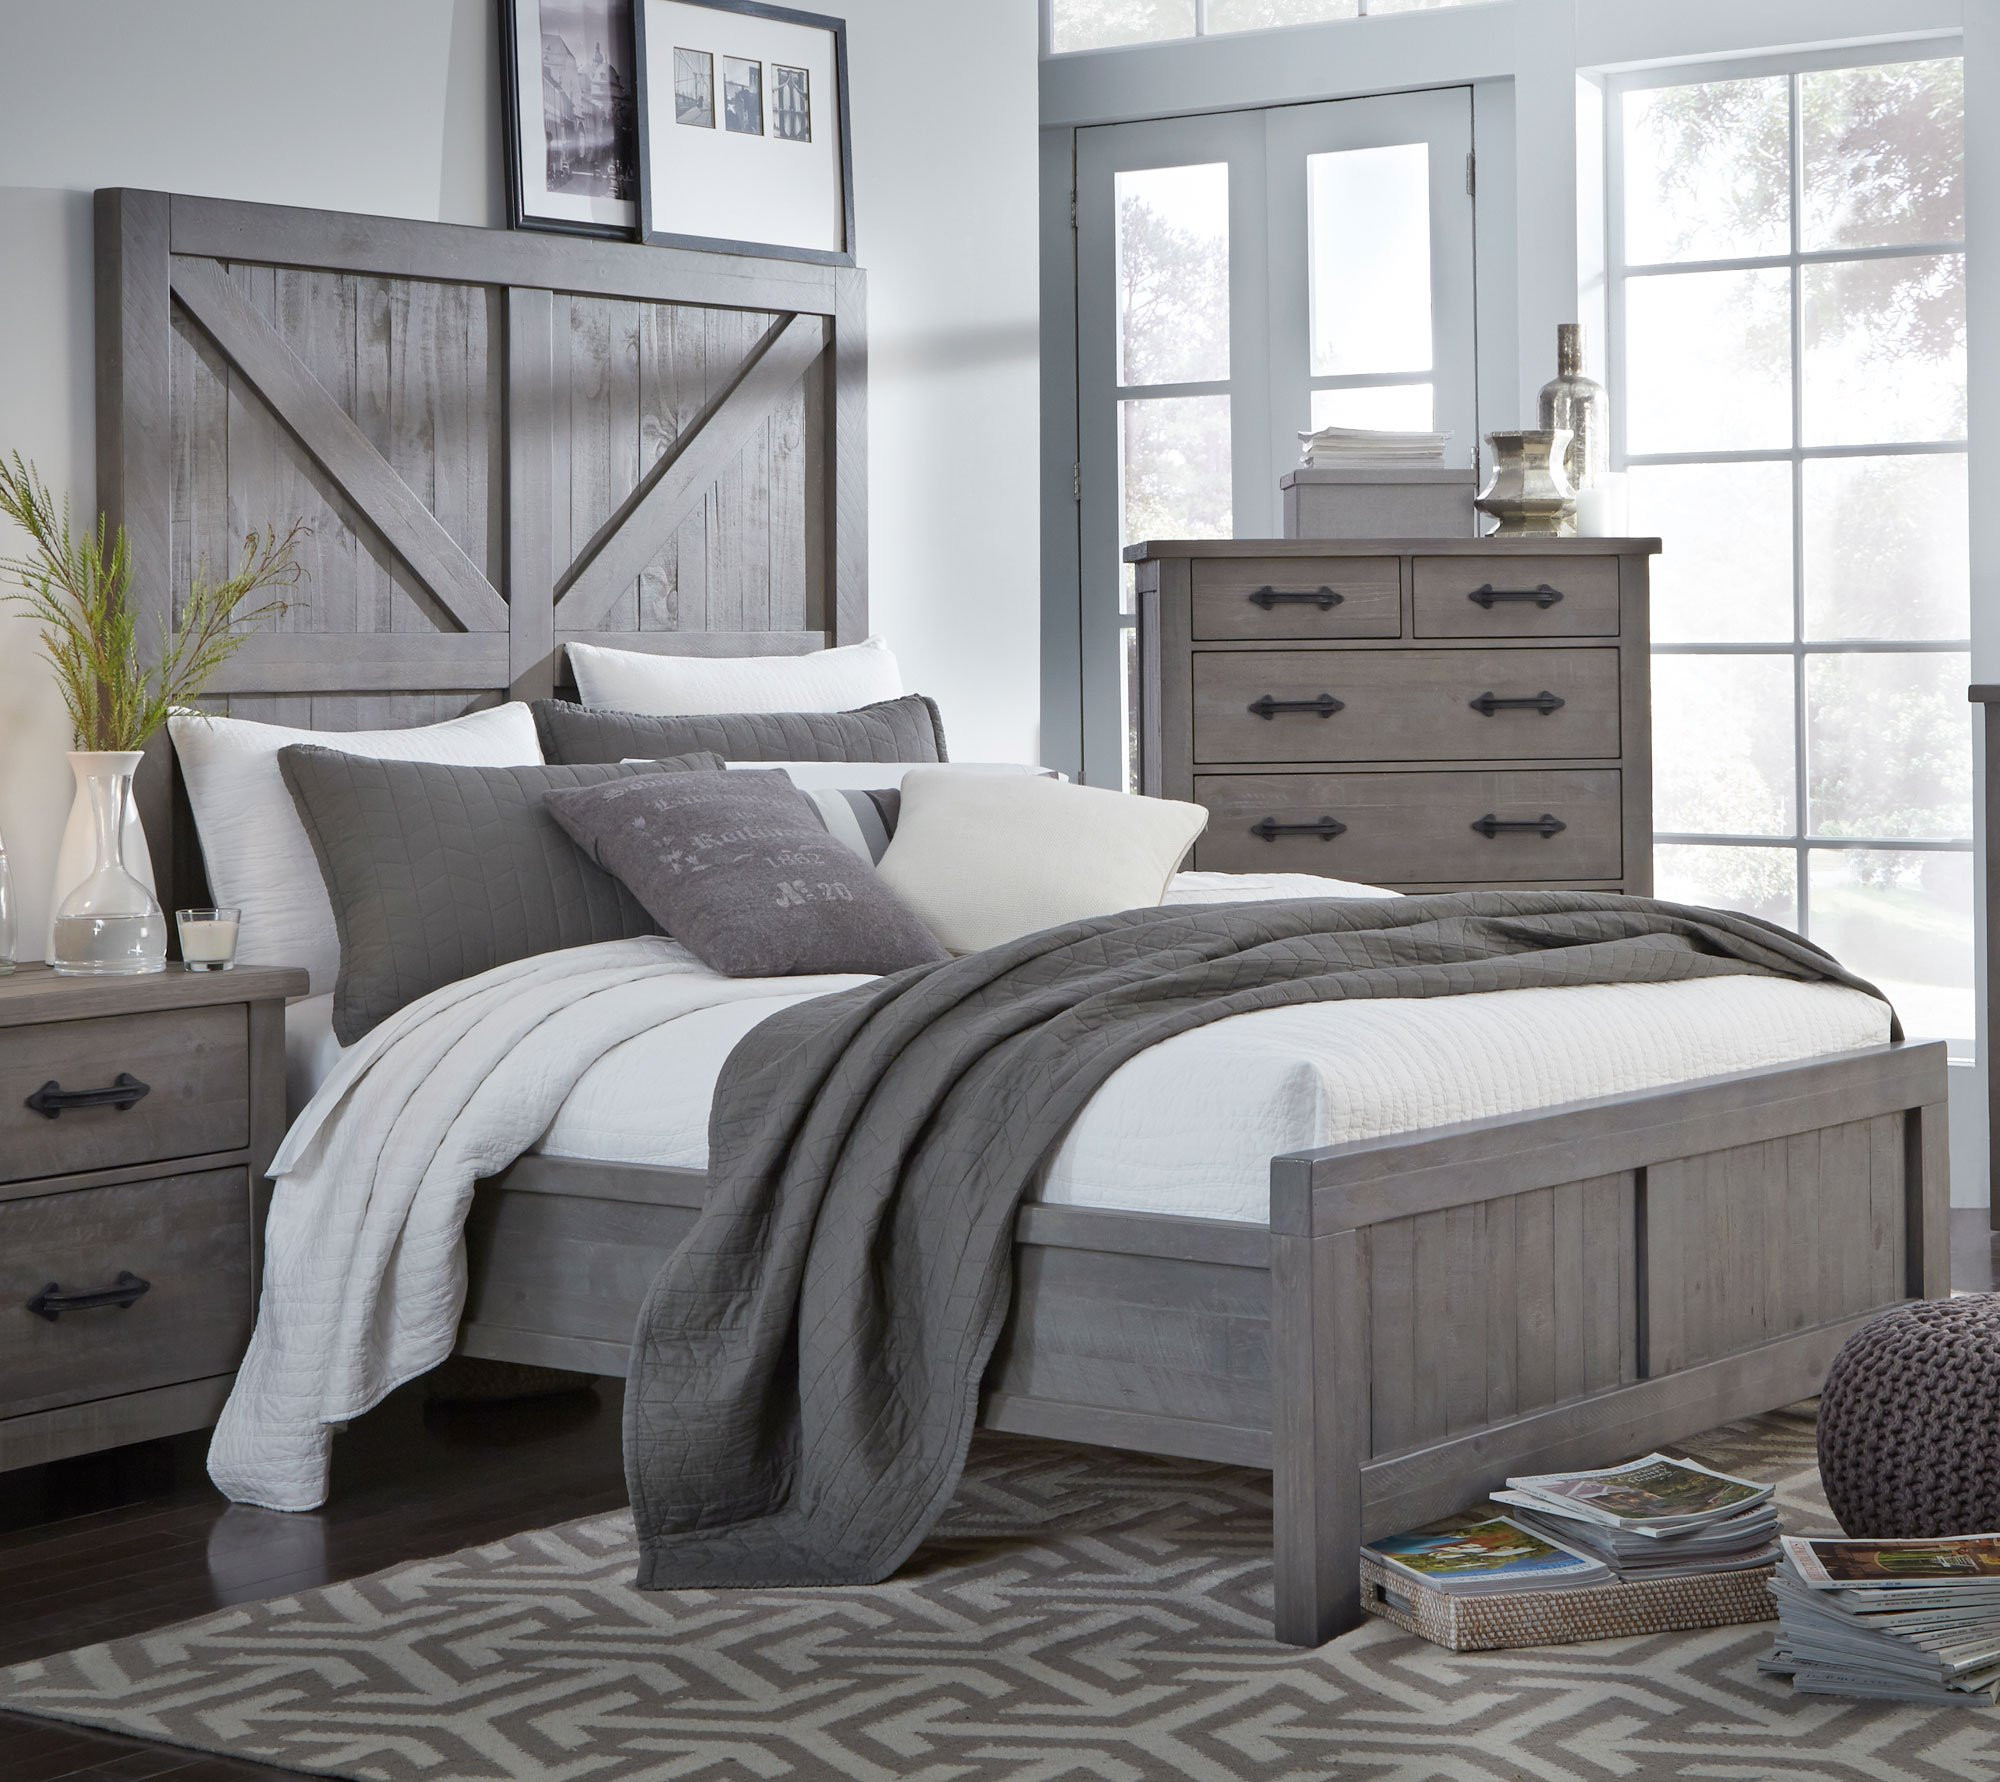 Rustic King Bedroom Set
 rustic king bedroom sets patchingreality